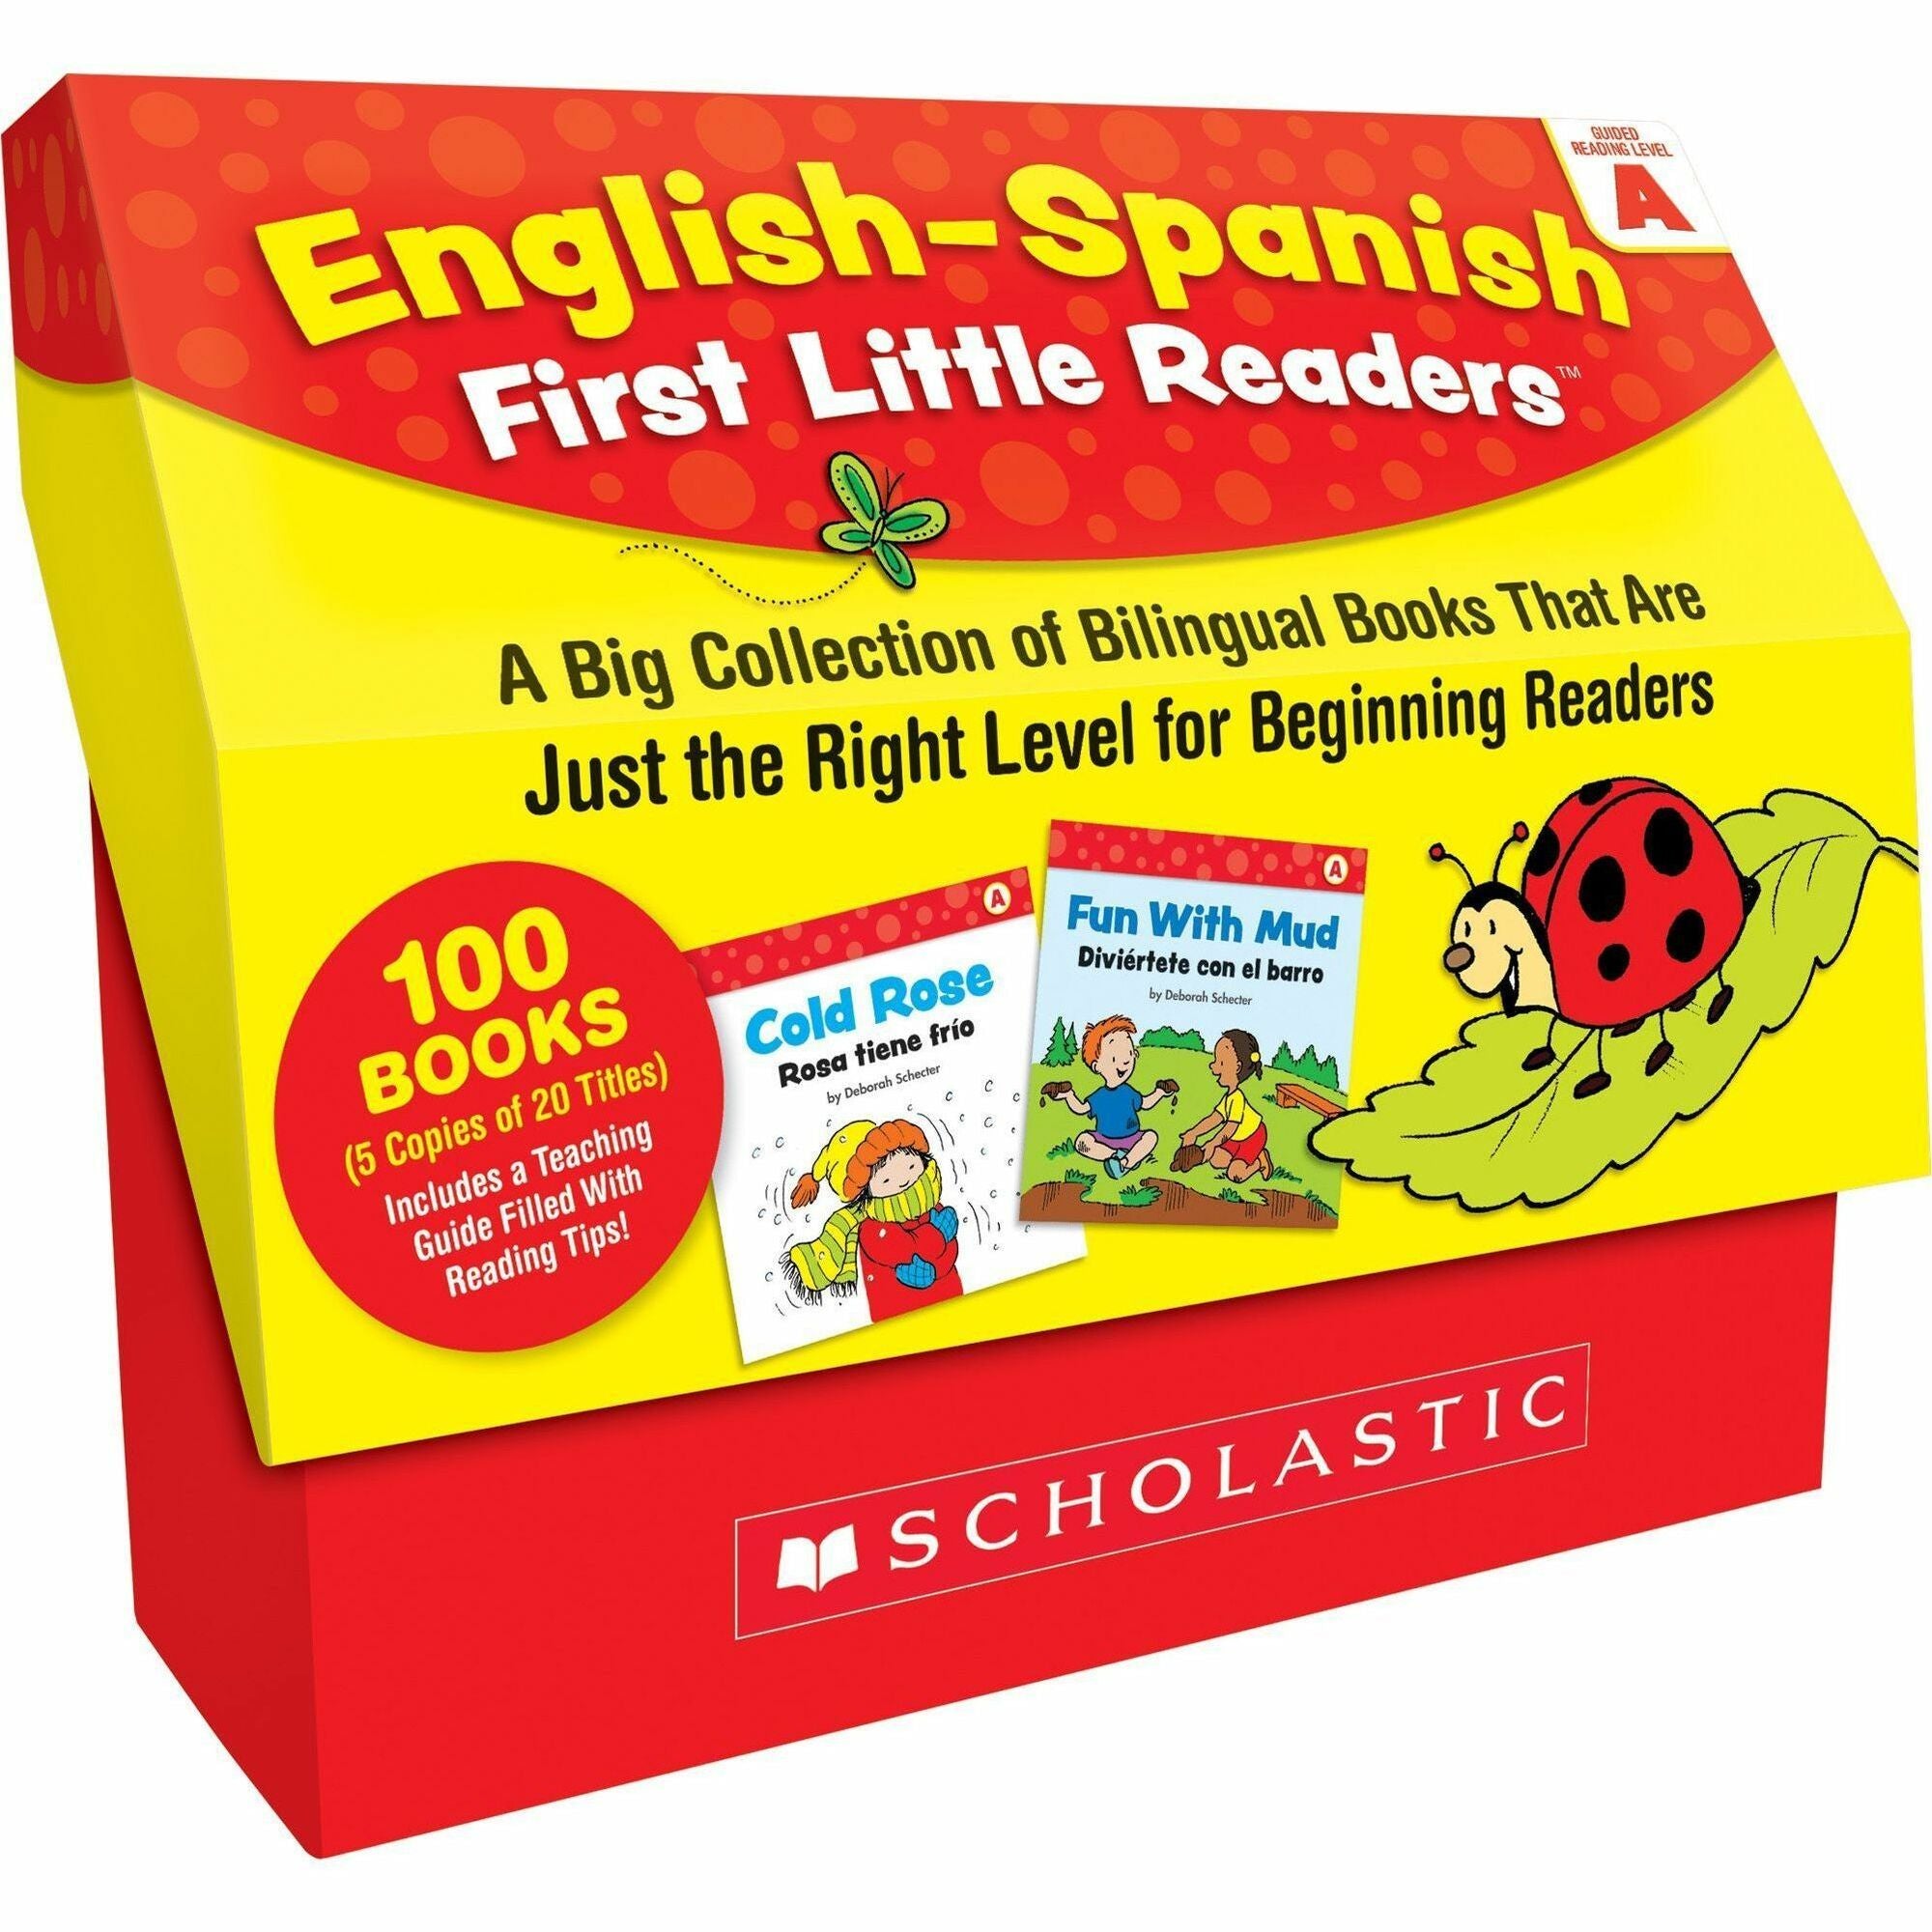 scholastic-first-little-readers-book-set-printed-book-by-deborah-schecter-8-pages-scholastic-teaching-resources-publication-june-1-2020-book-grade-preschool-2-english-spanish_shs133866803x - 1